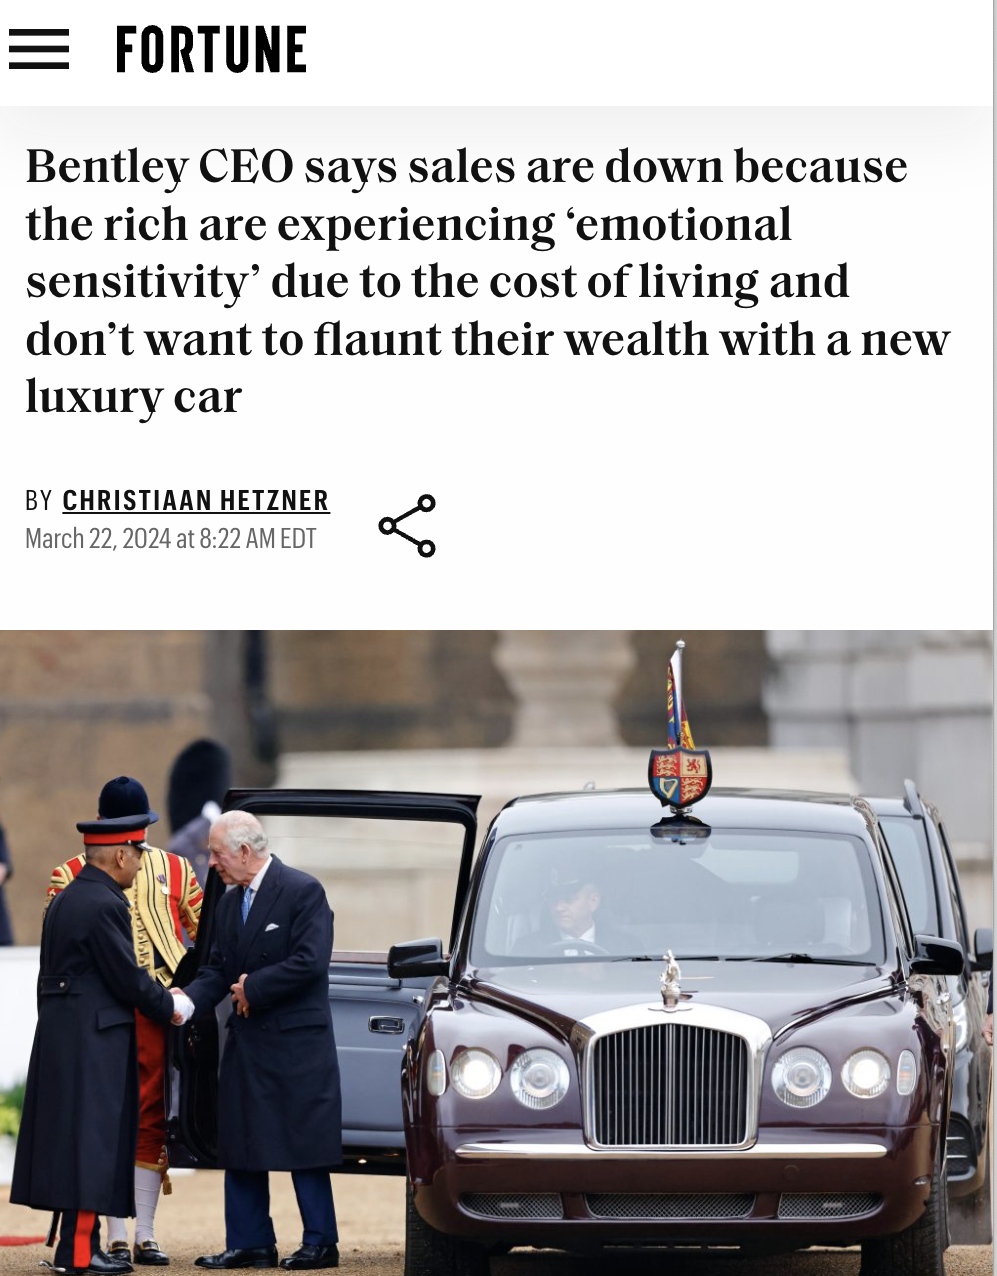 rolls-royce corniche - Fortune Bentley Ceo says sales are down because the rich are experiencing 'emotional sensitivity' due to the cost of living and don't want to flaunt their wealth with a new luxury car By Christiaan Hetzner at Edt